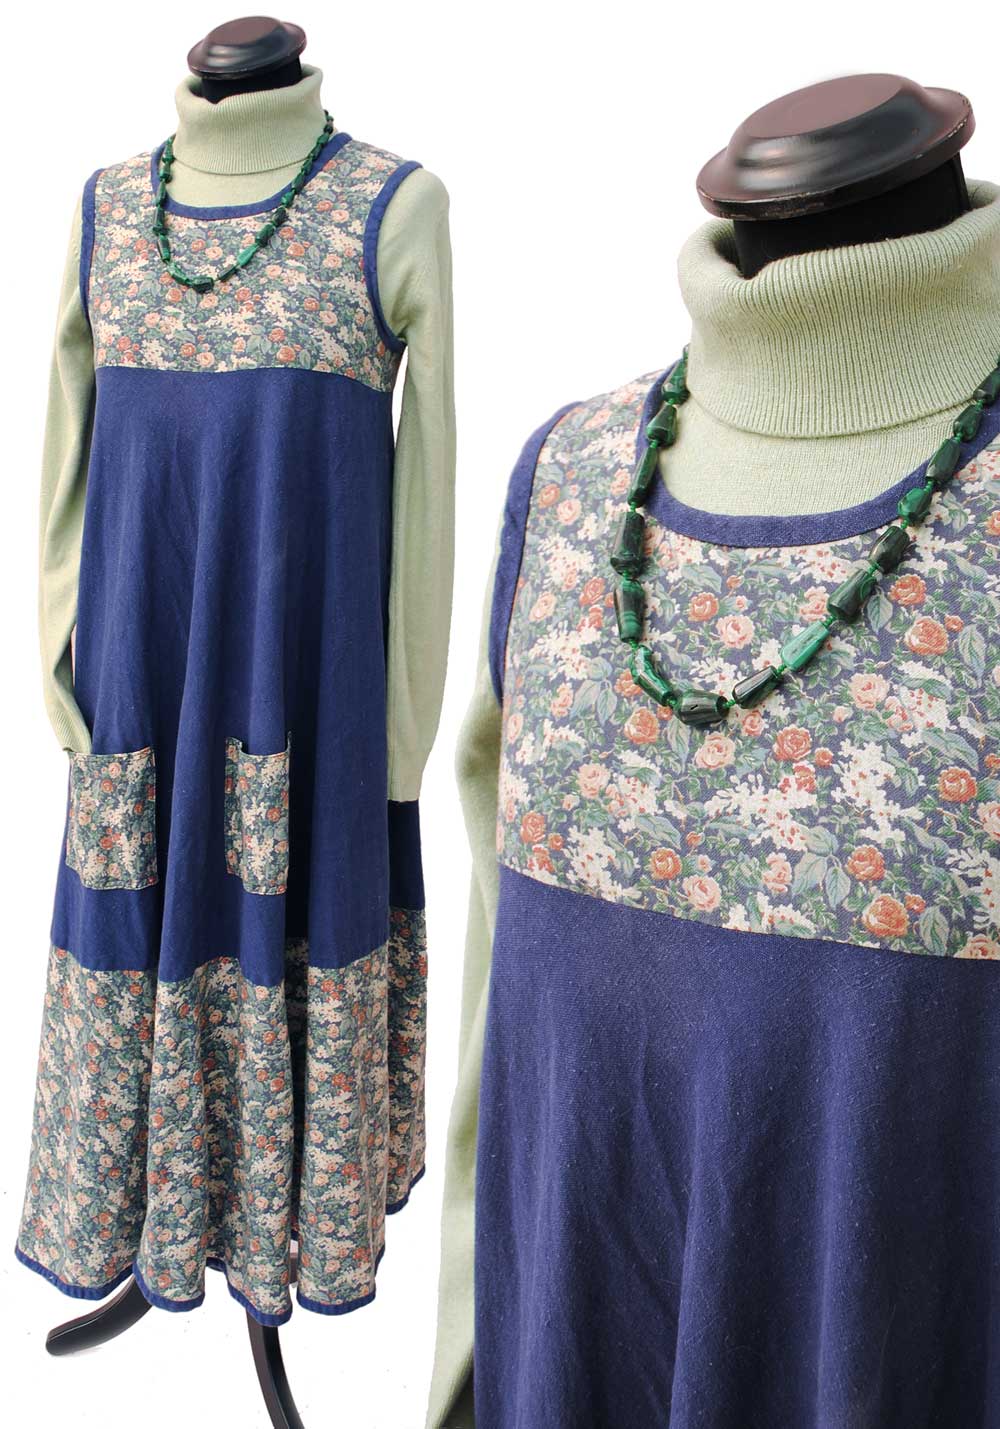 unusual vintage annabelinda smock dress, works as a maternitiy dress with liberty print bodice and front pockets